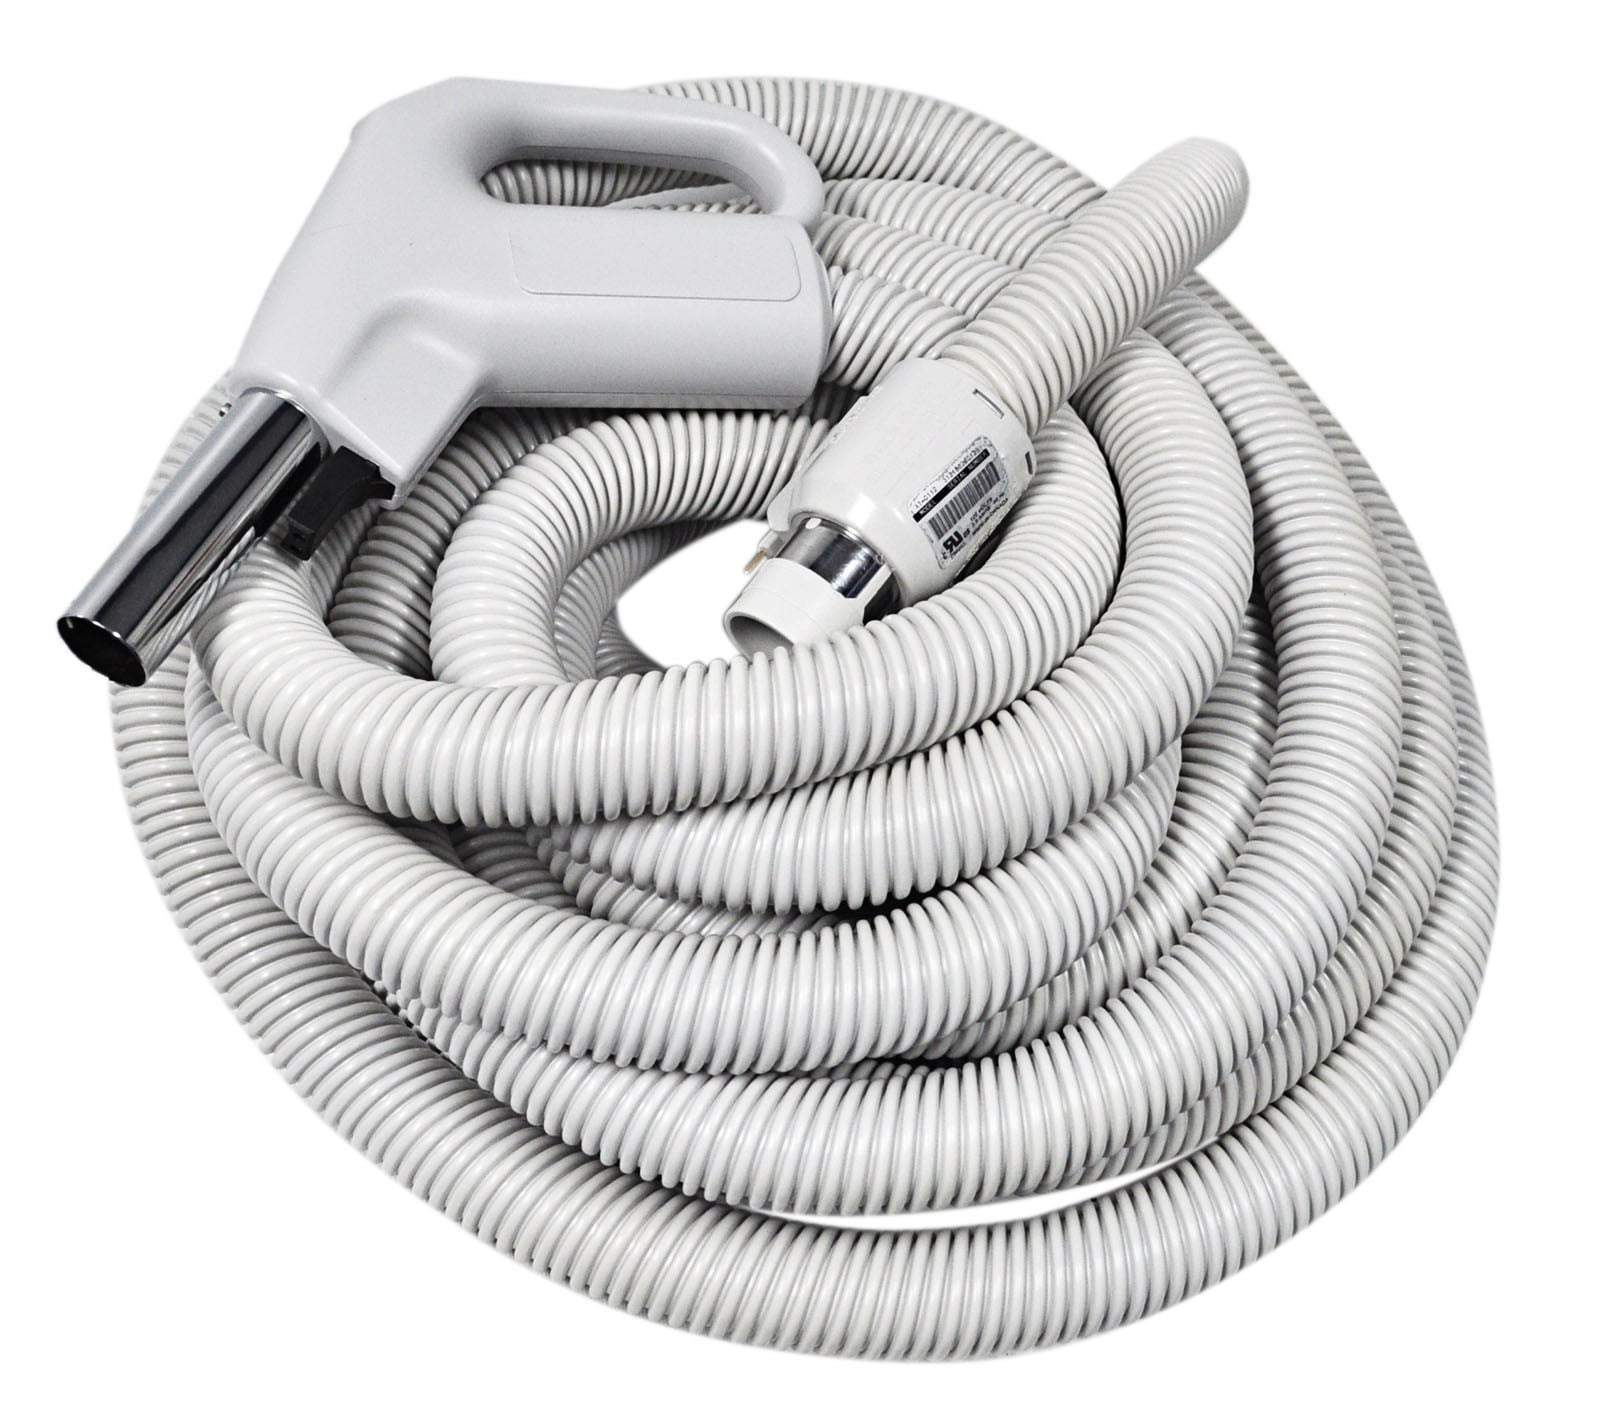 Generic Electrolux Central Vacuum Cleaner 35 Feet Long Direct Connect Hose 